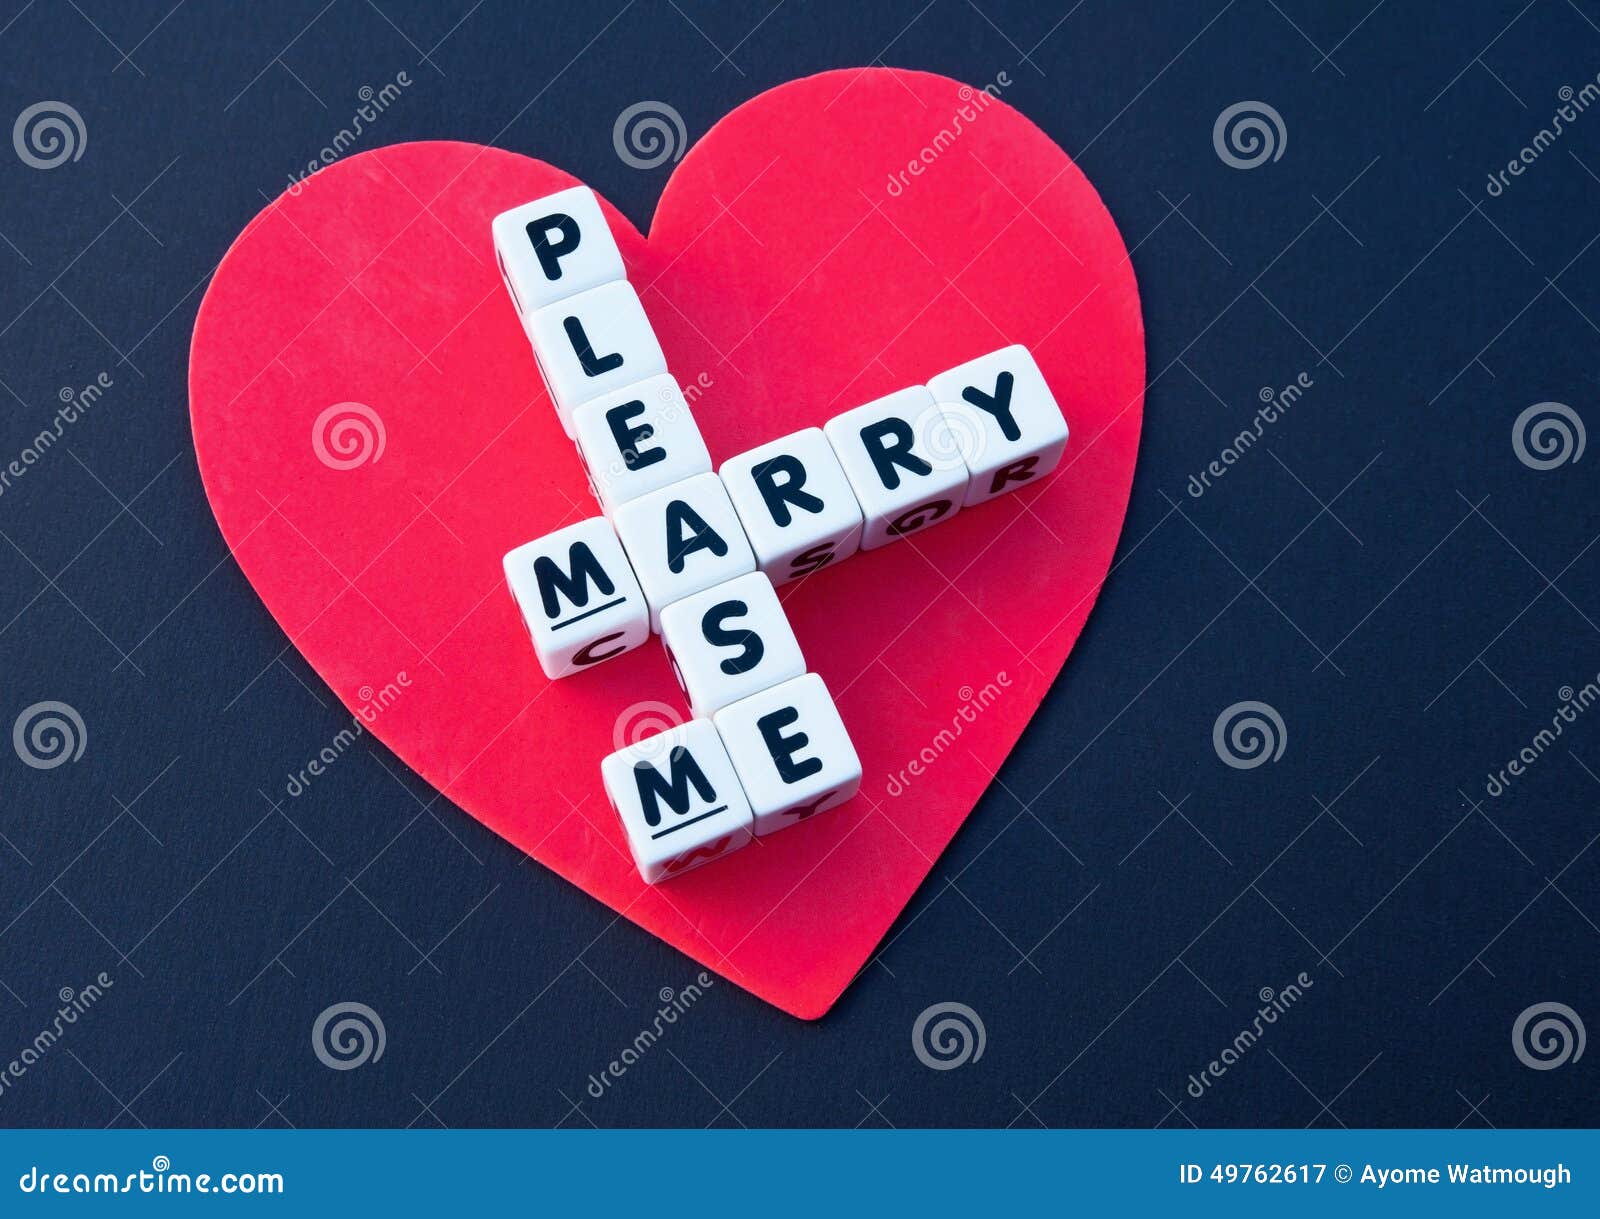 Please Marry Me Stock Image Image Of Marry Knee Heart